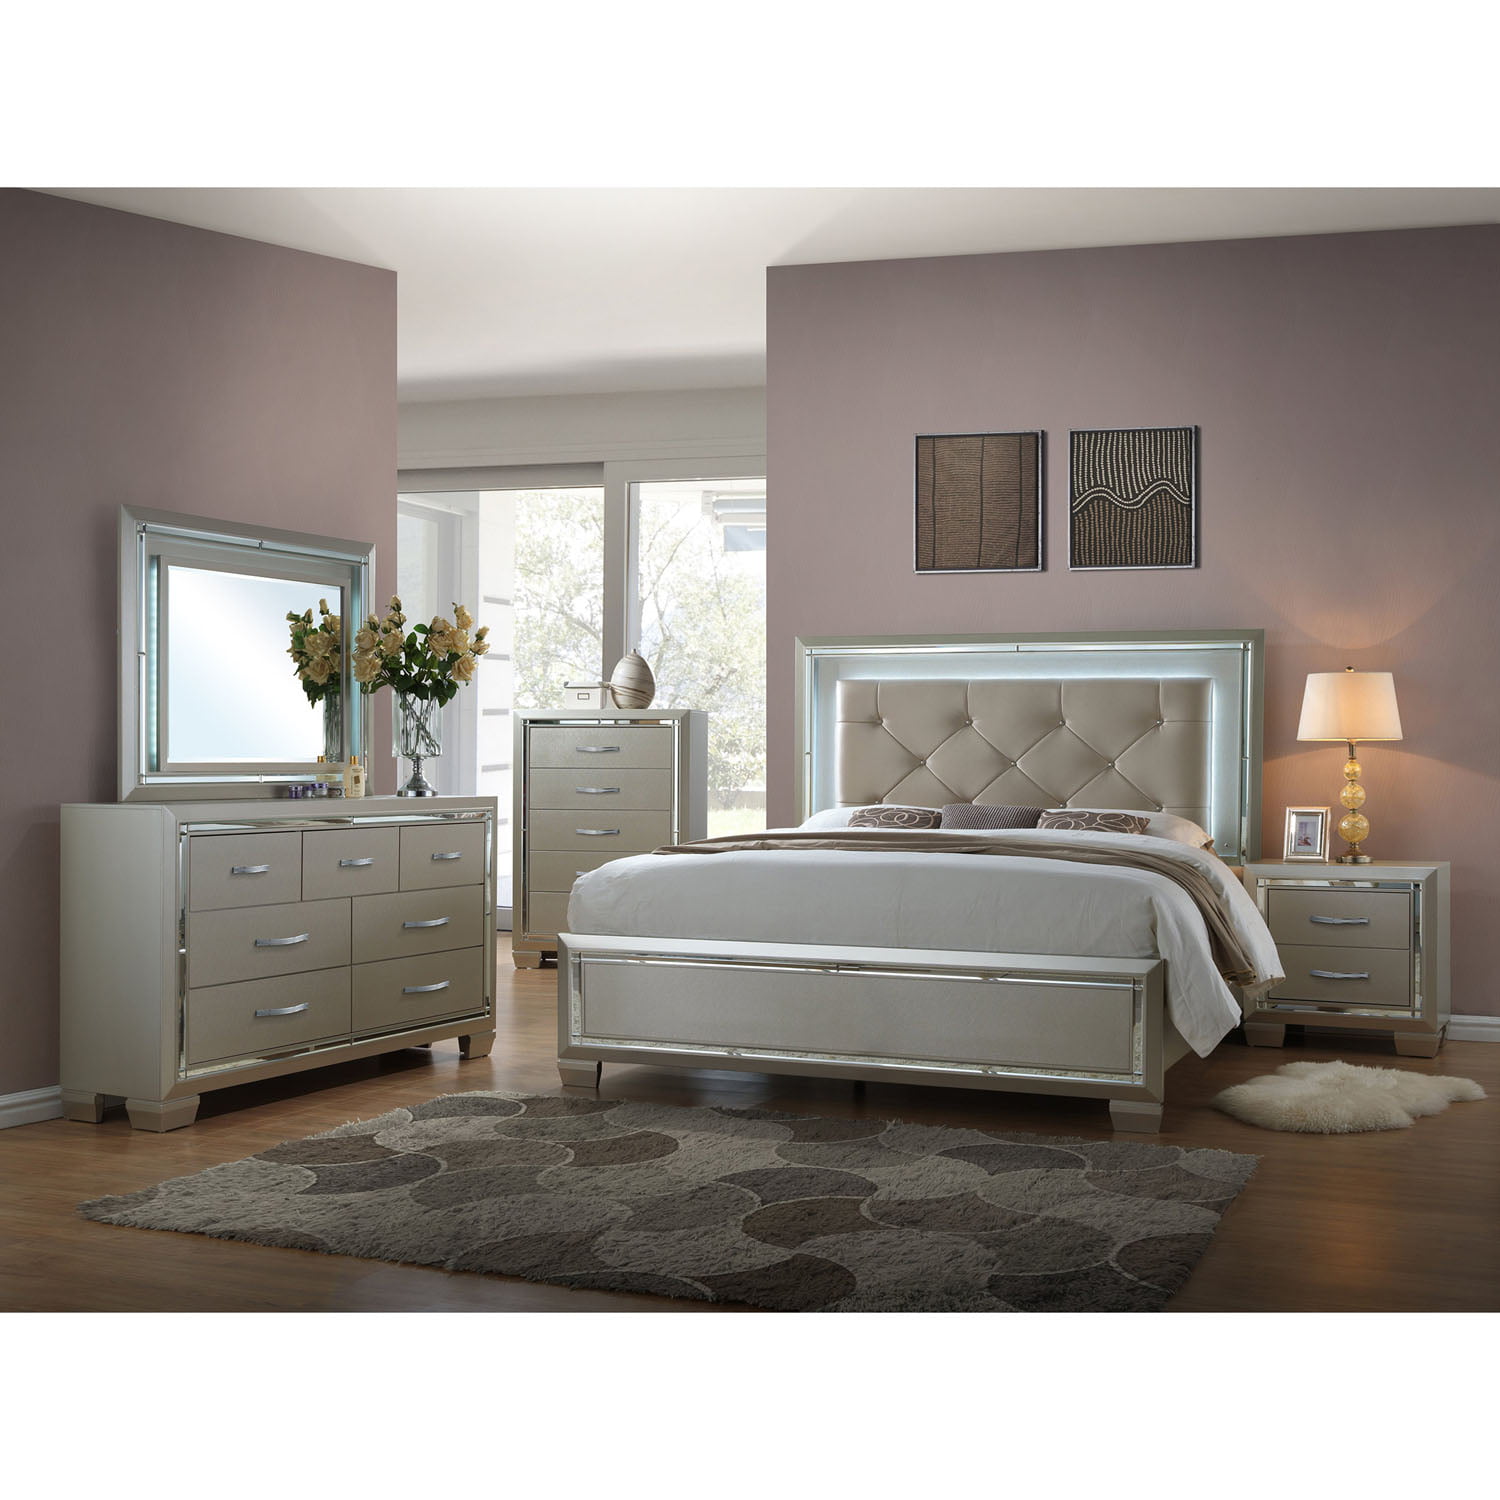 Cambridge Elegance Queen-Size Bed Frame with LED Mood Lighting